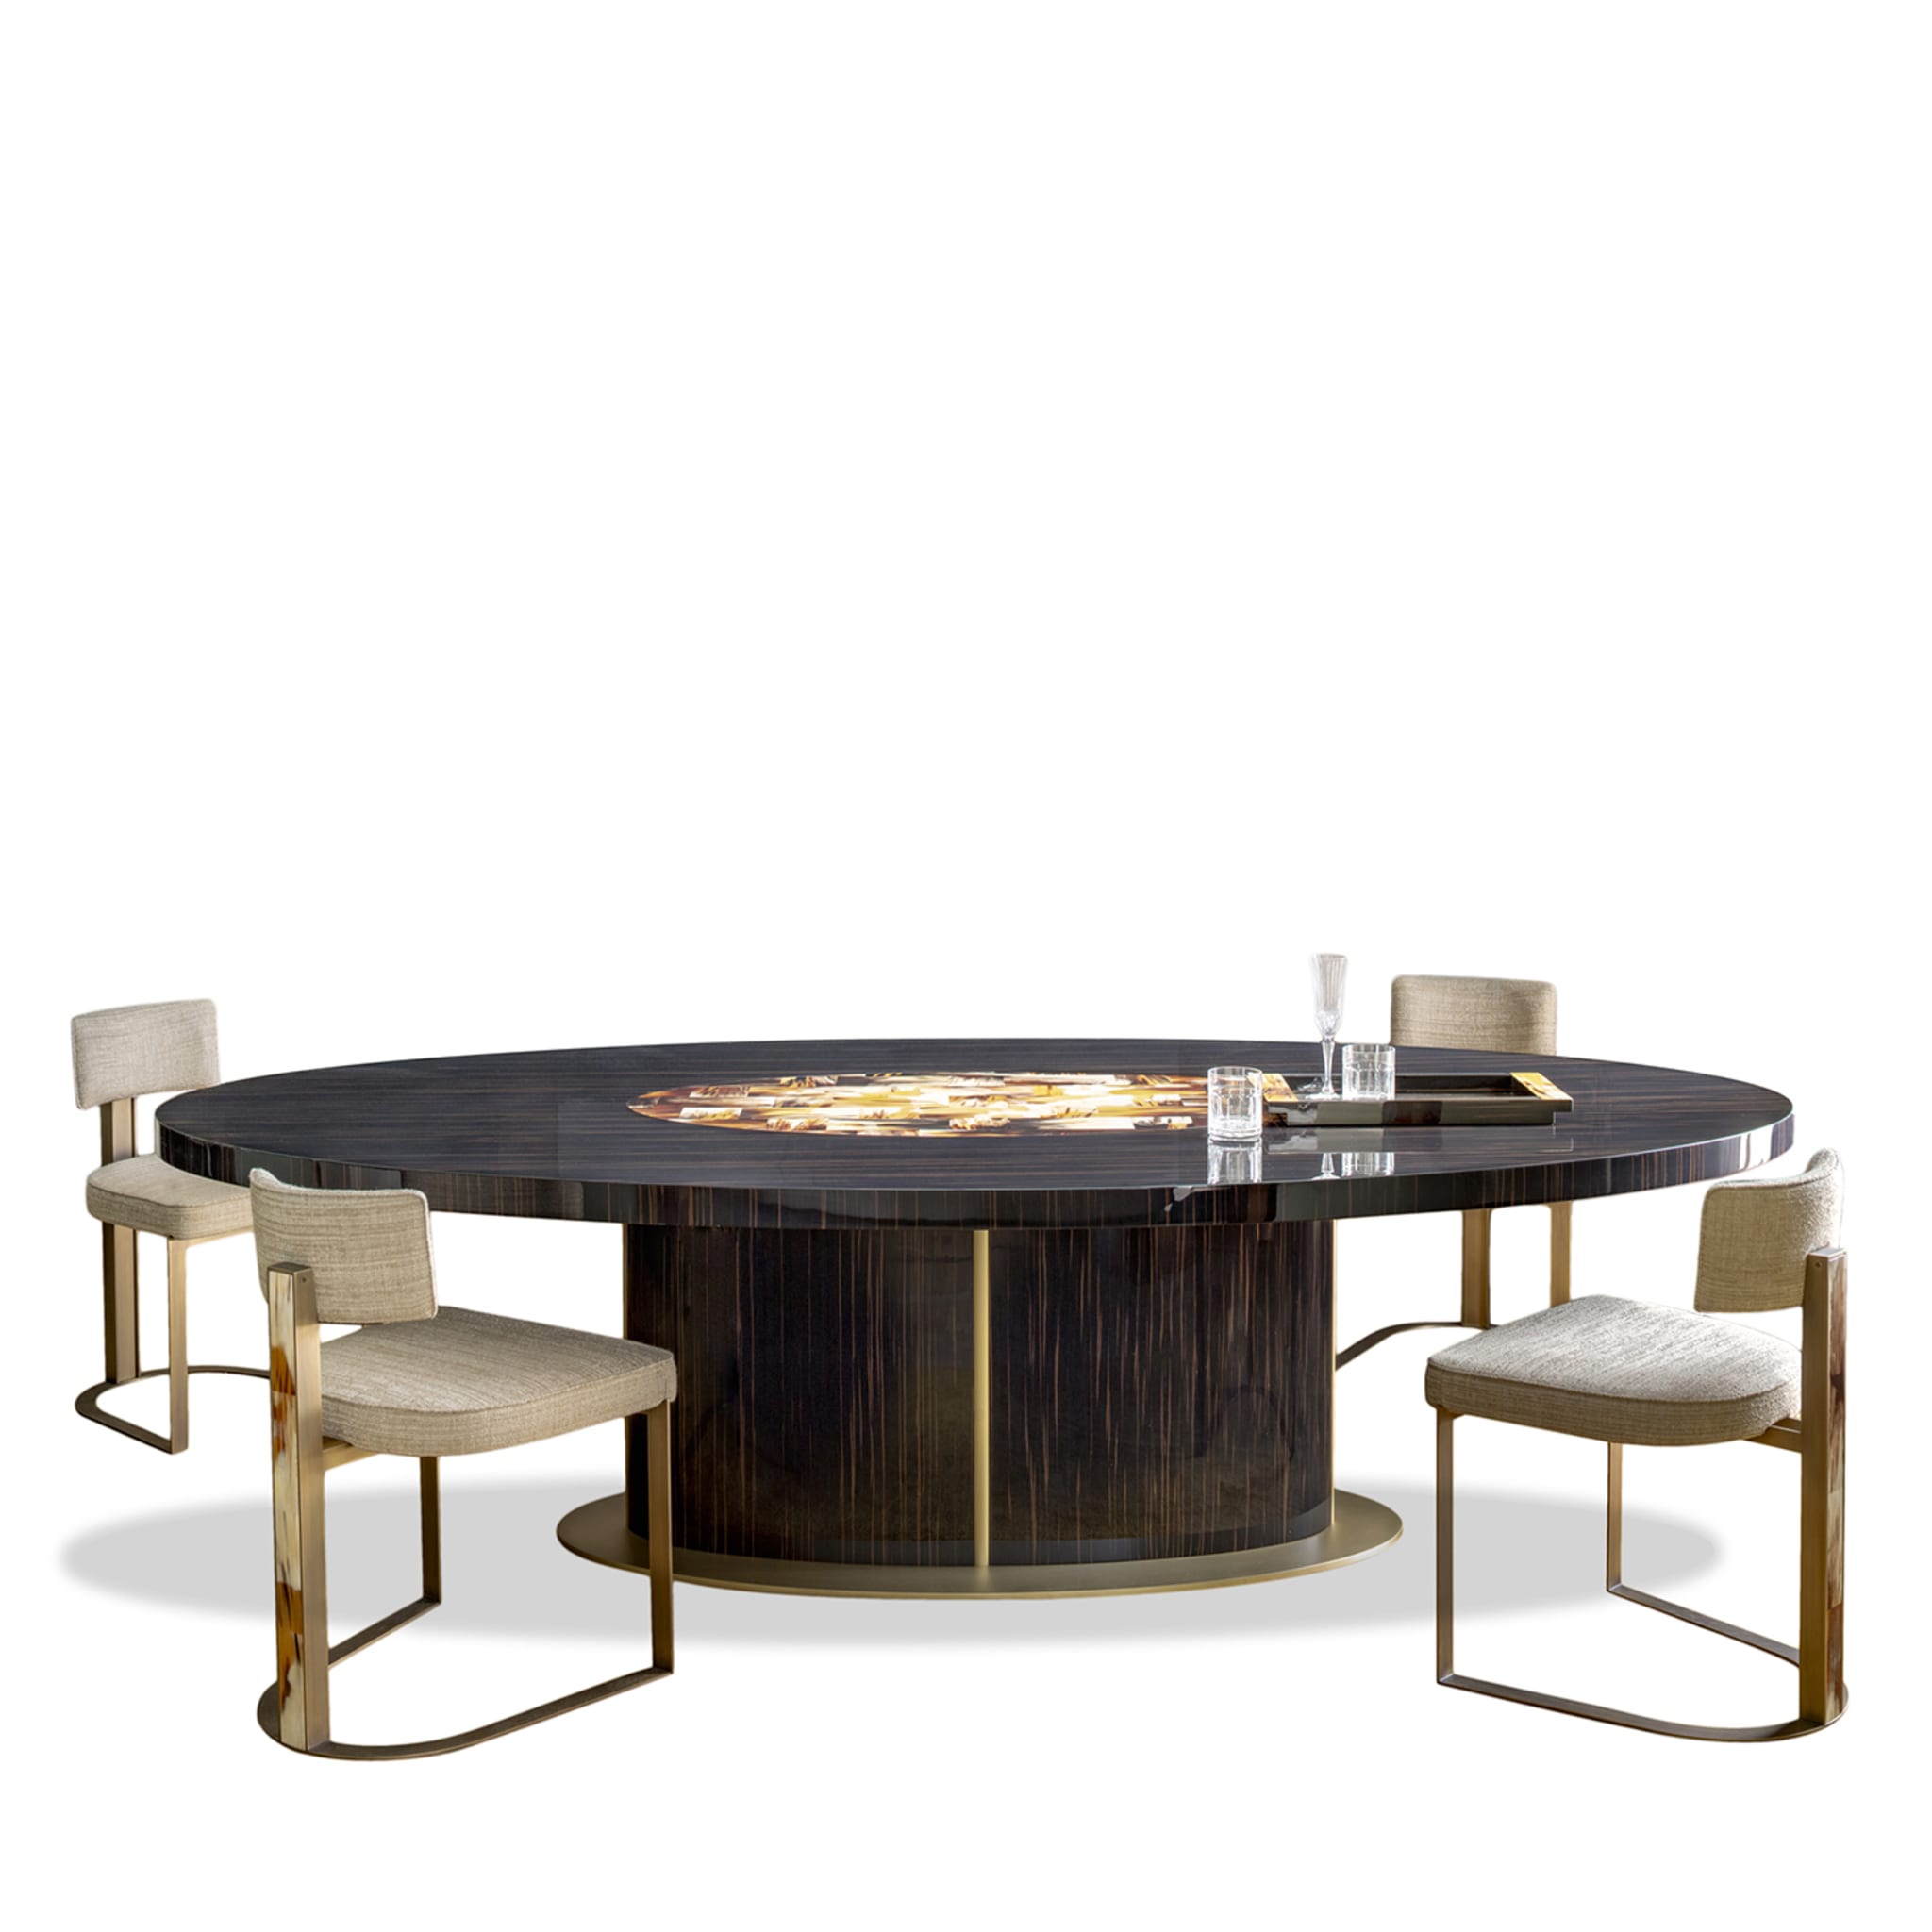 Nettuno Oval Ebony Dining Table with Horn Inlays - Alternative view 2